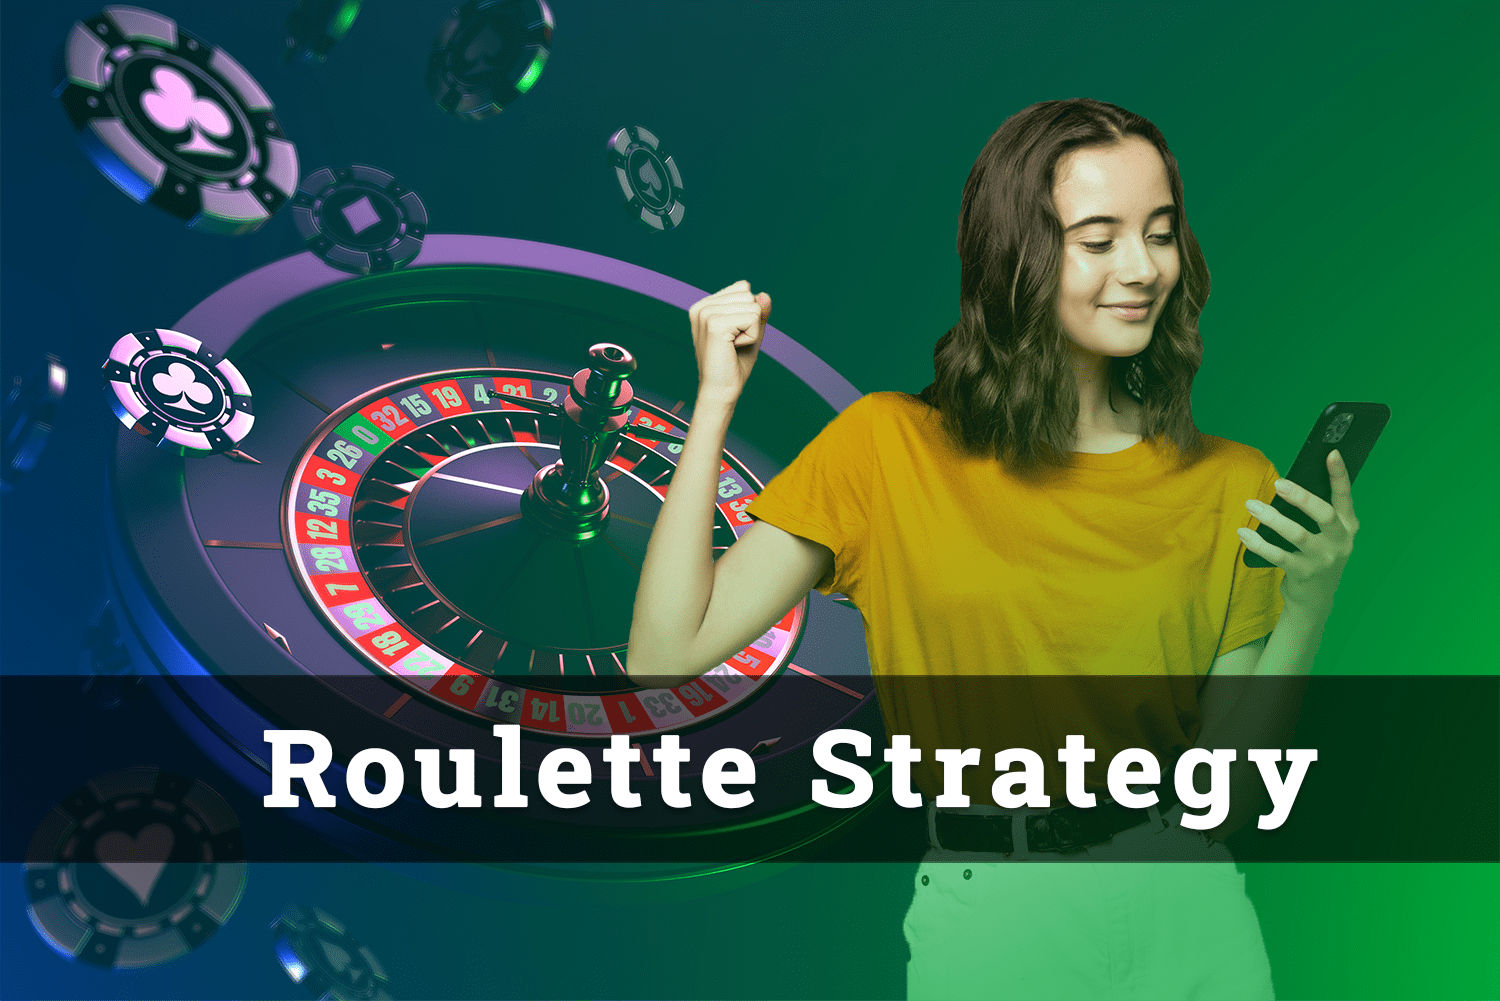 Roulette strategy lppuehwa